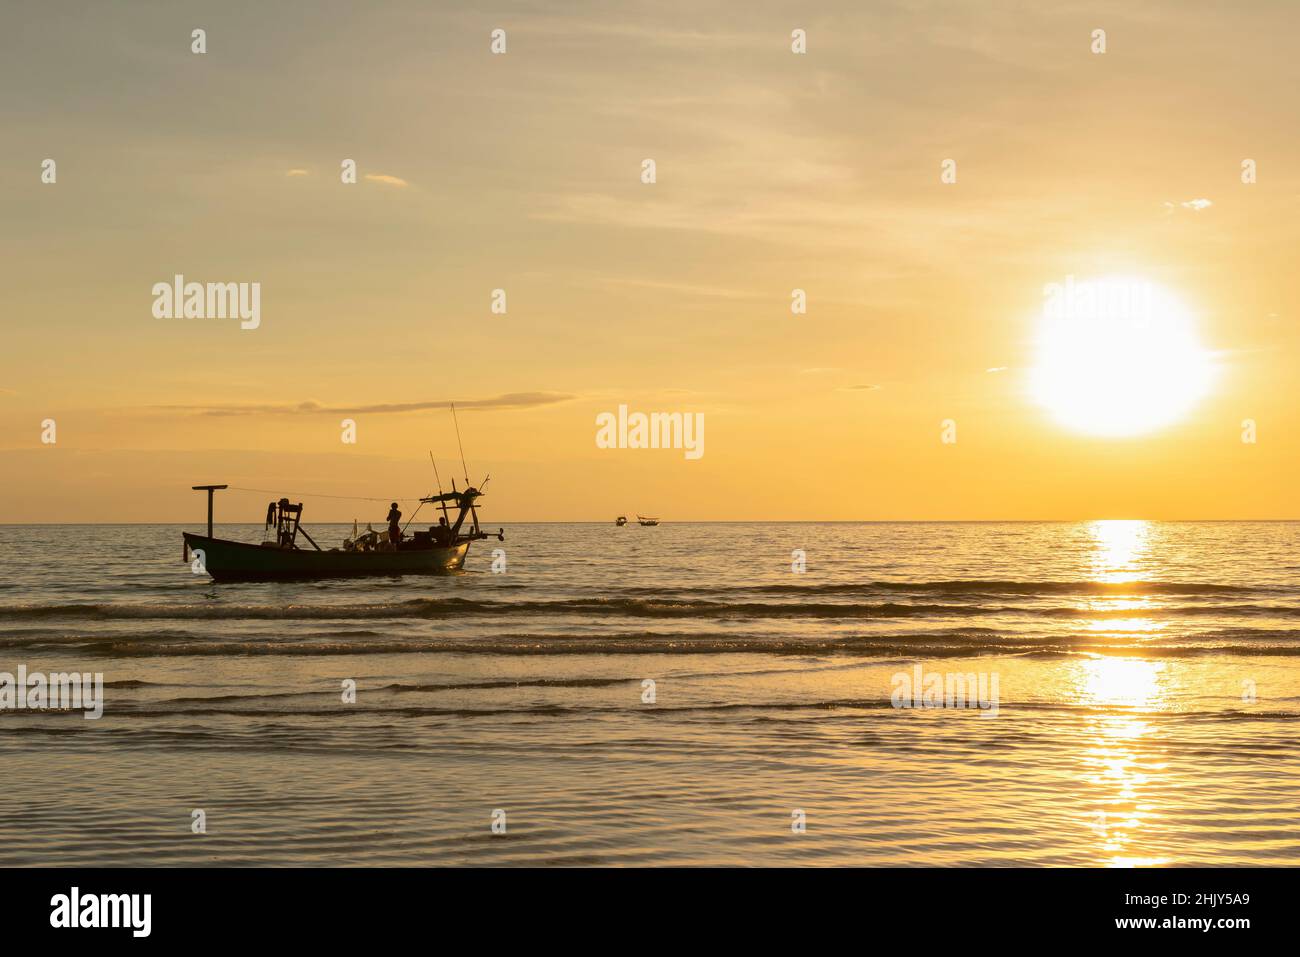 Silhouette of boats during sunset Stock Photo